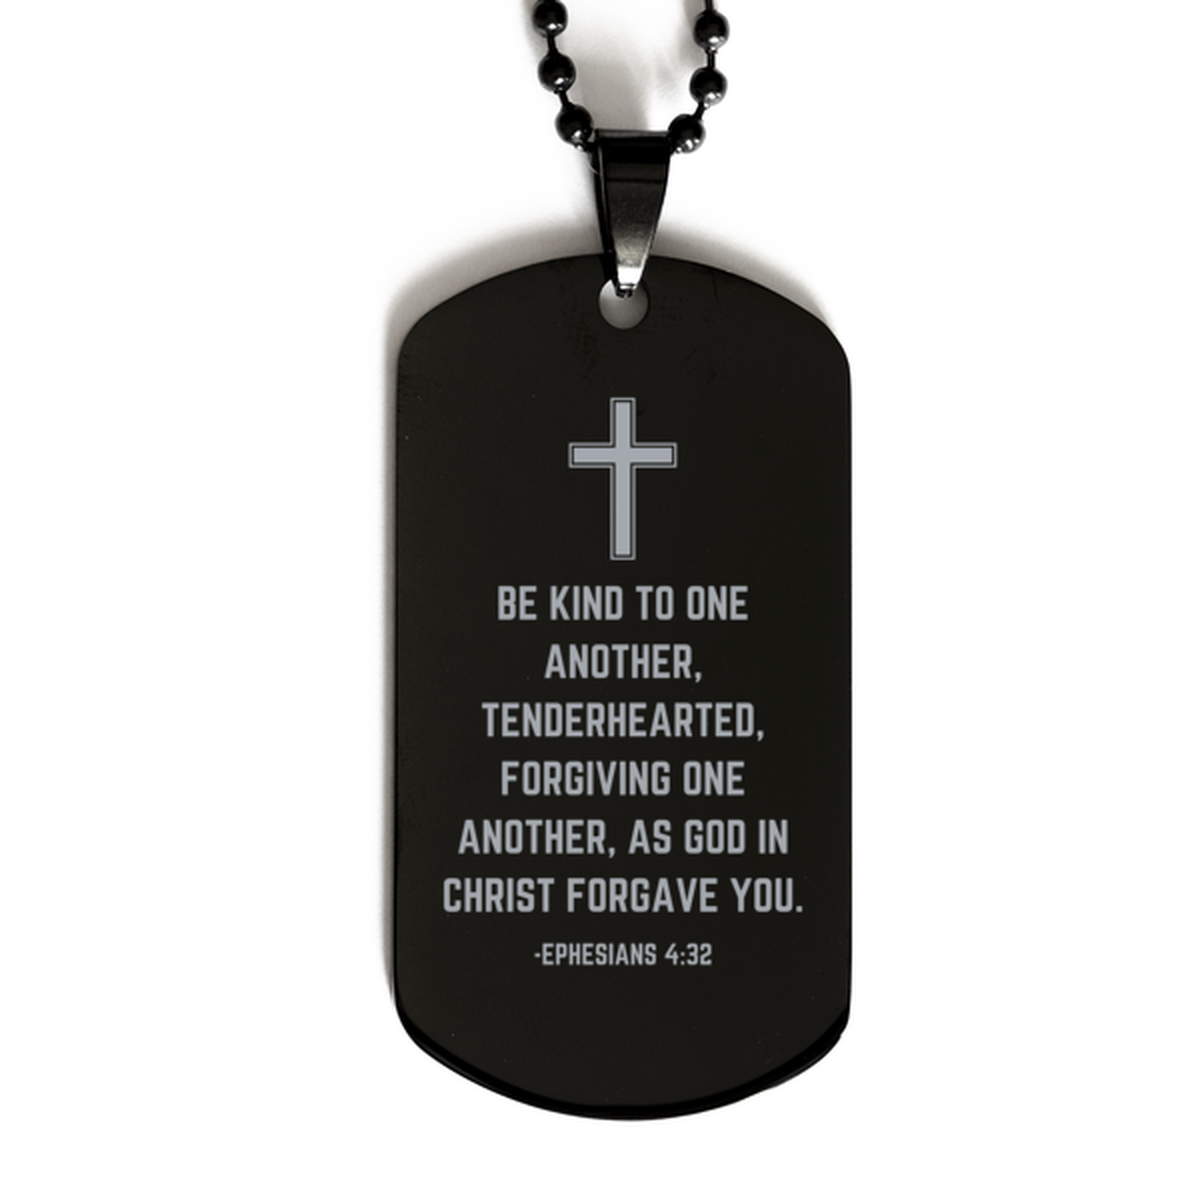 Baptism Gifts For Teenage Boys Girls, Christian Bible Verse Black Dog Tag, Be kind to one another, Confirmation Gifts, Bible Verse Necklace for Son, Godson, Grandson, Nephew